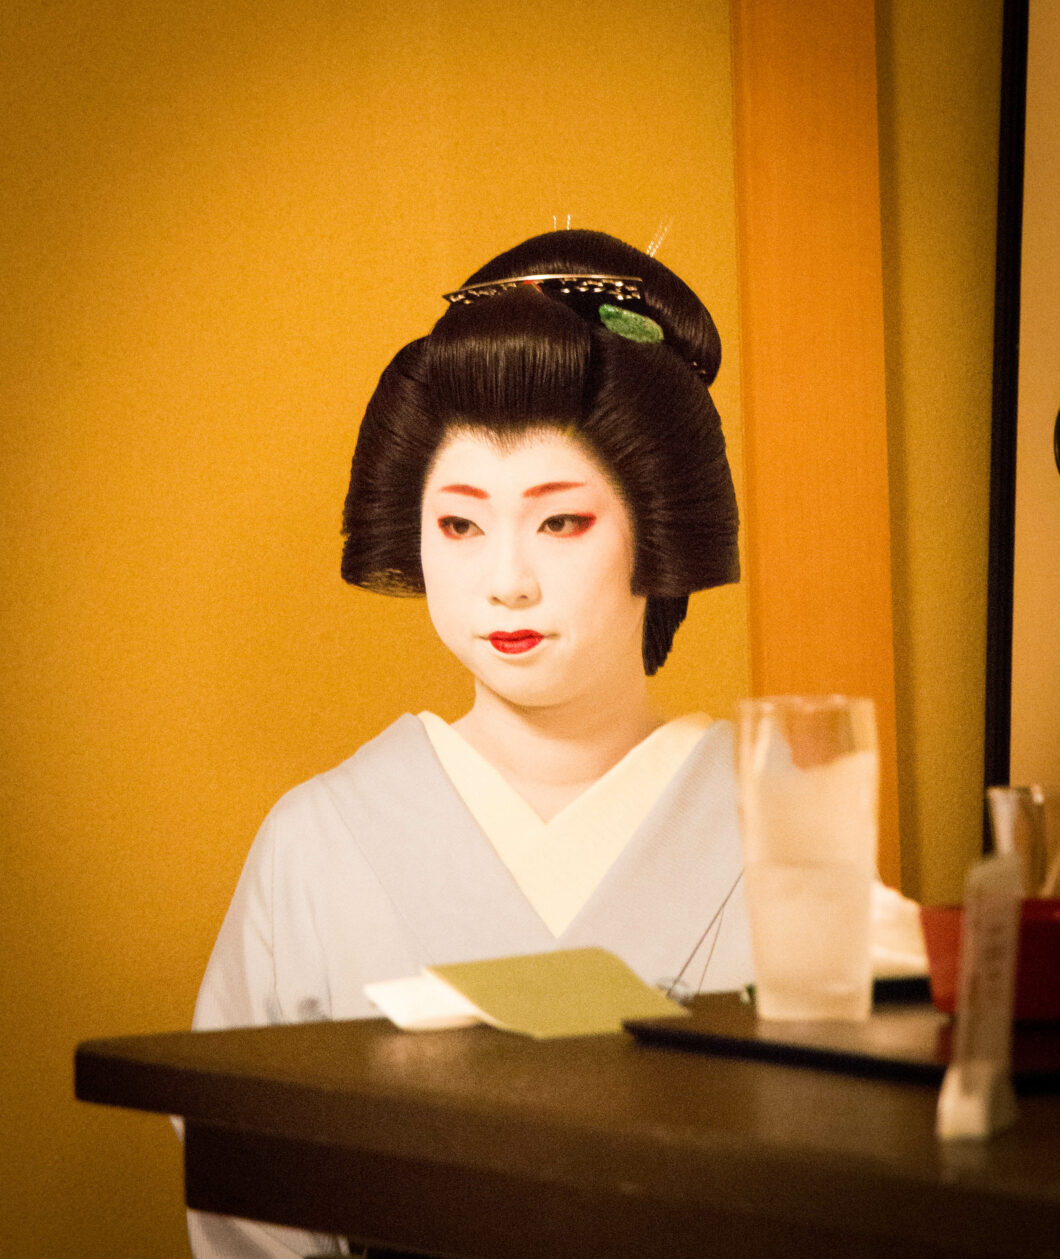 How to Spend an Evening with a Geisha